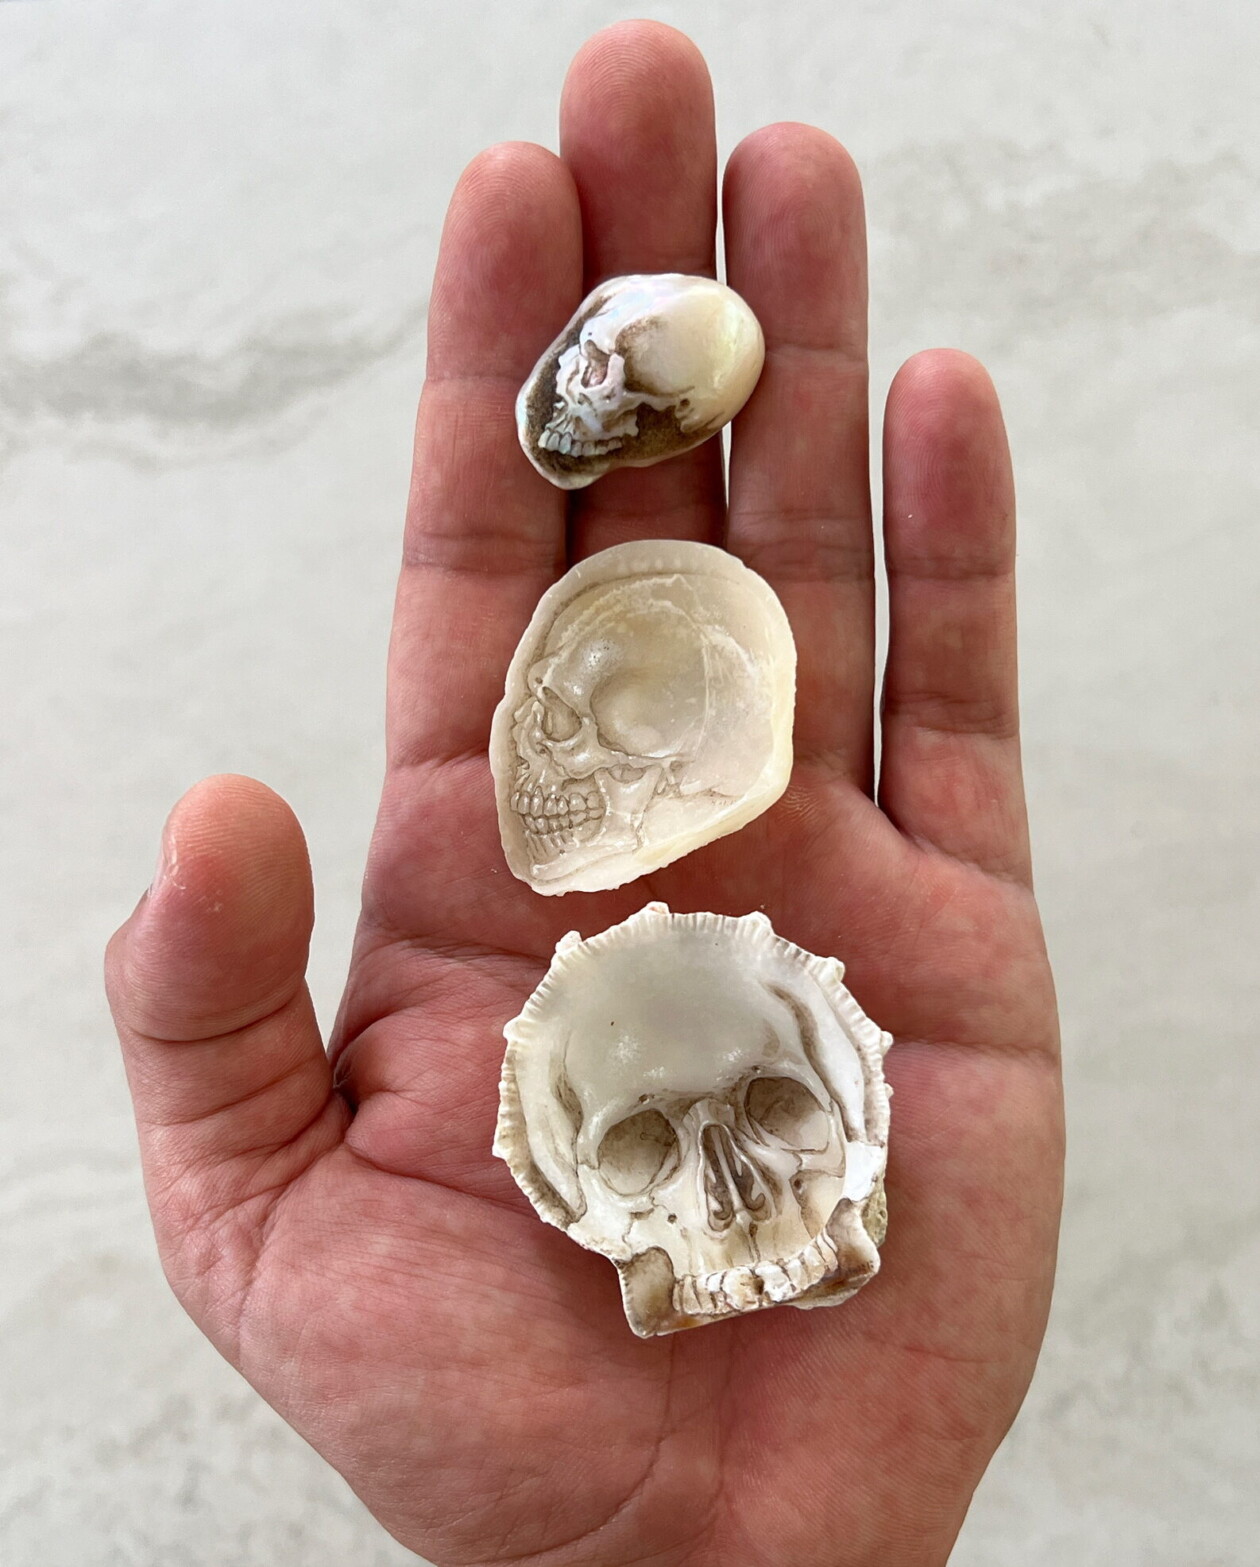 Sculptures Of Anatomical Details Made From Found Coral And Shells By Gregory Halili (8)